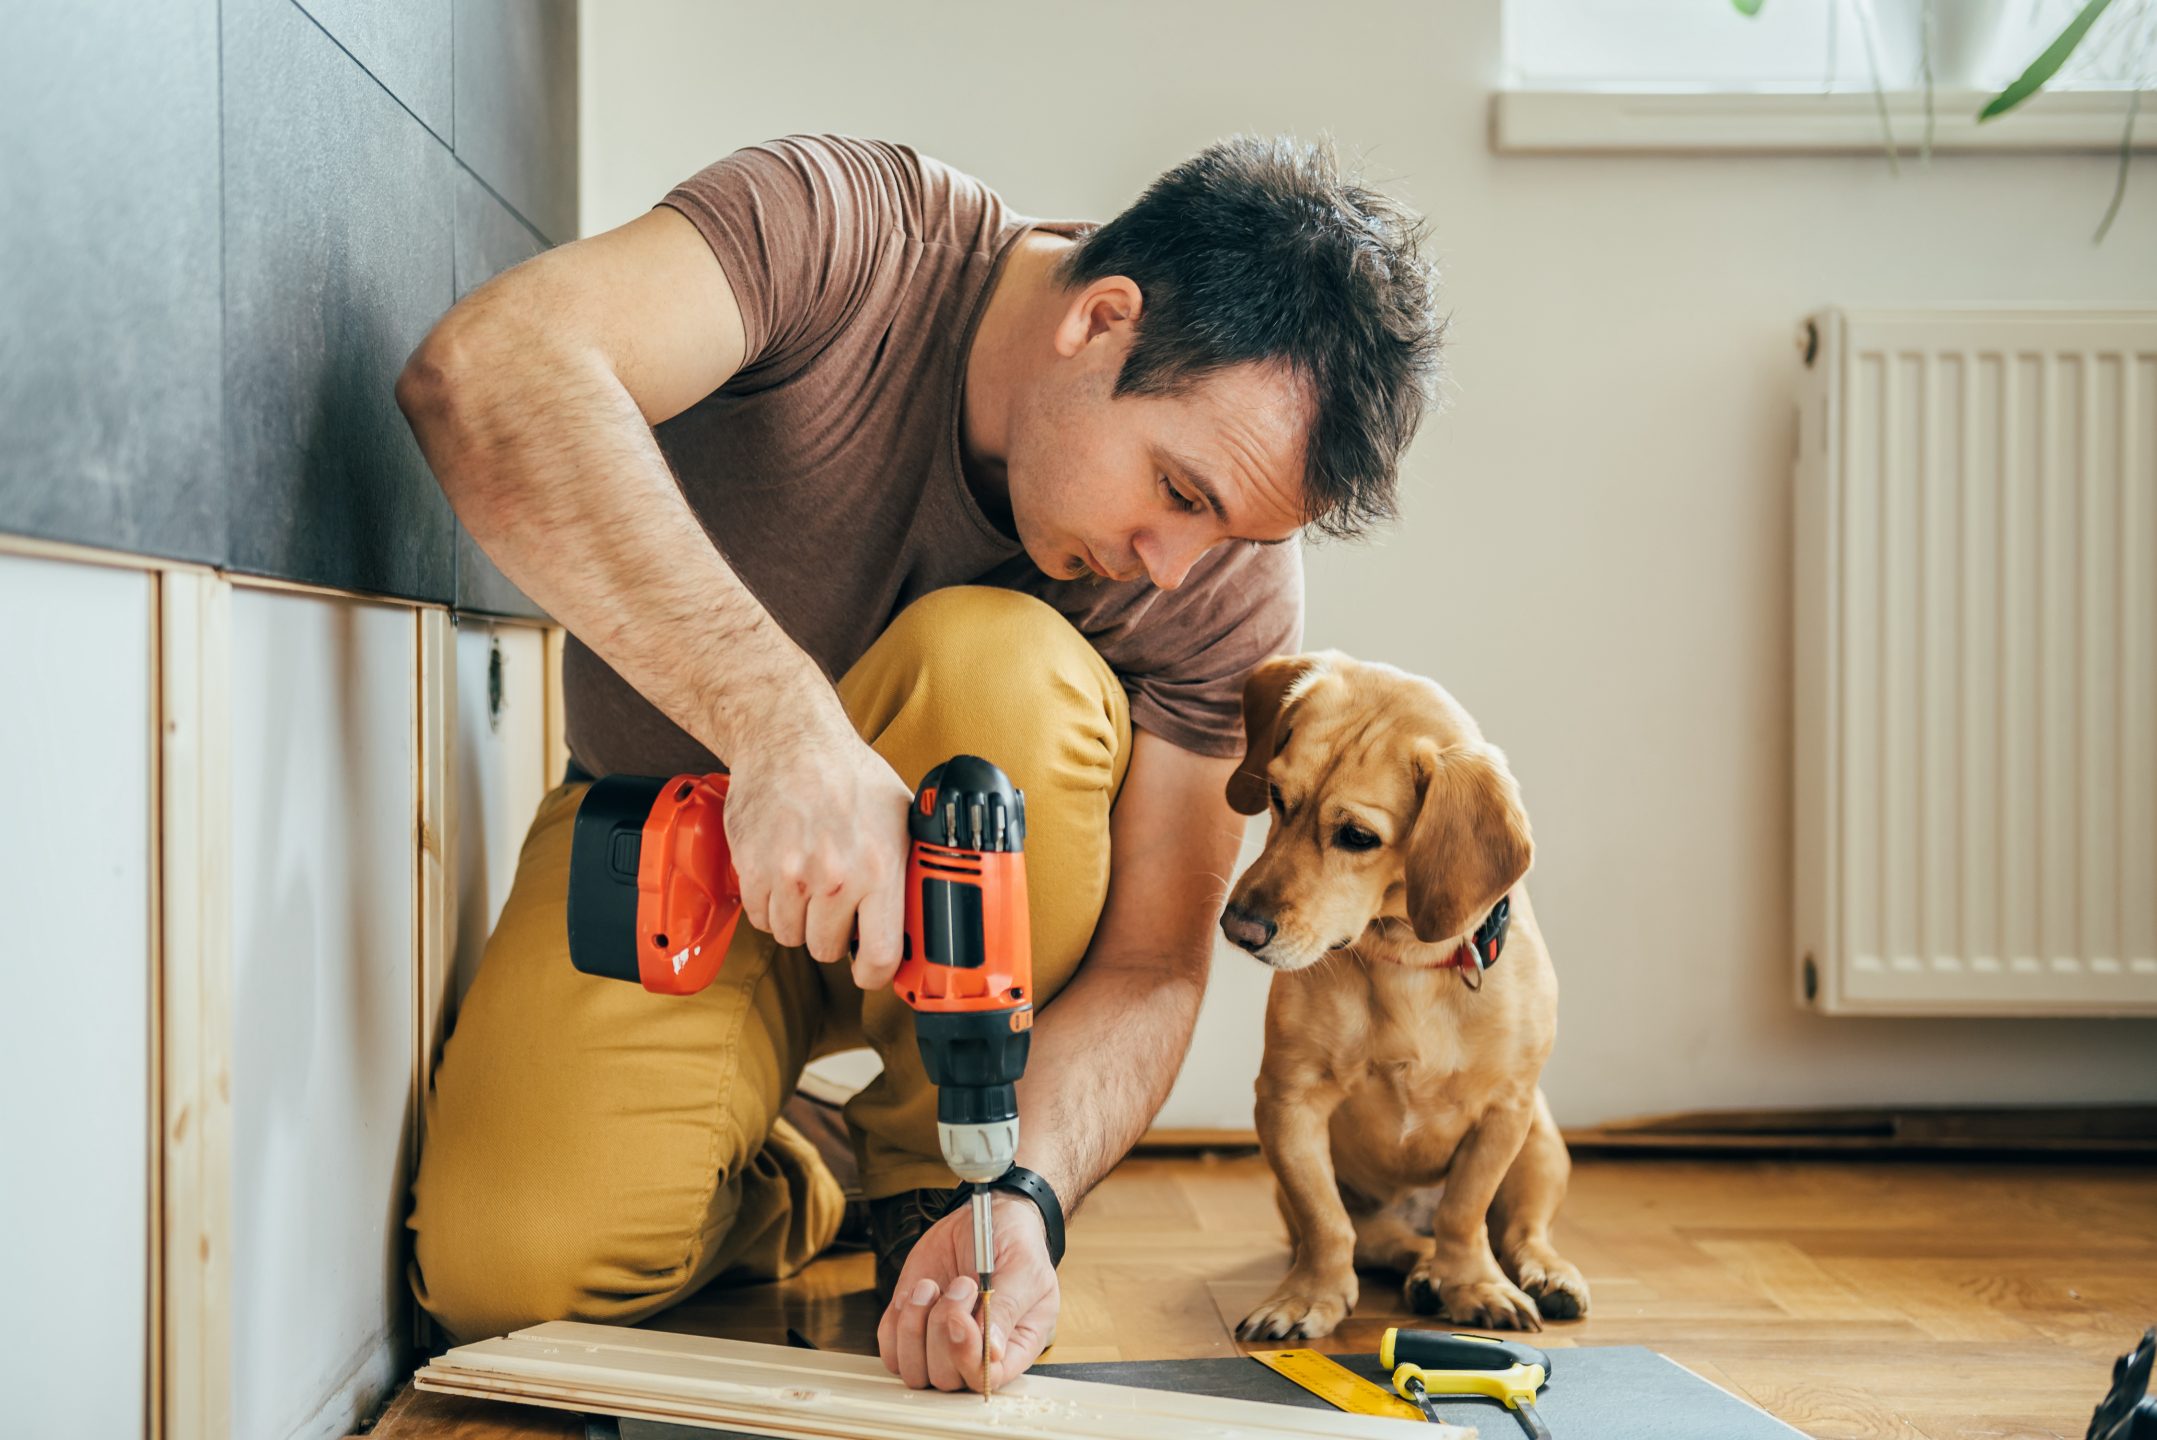 home improvements with the best roi